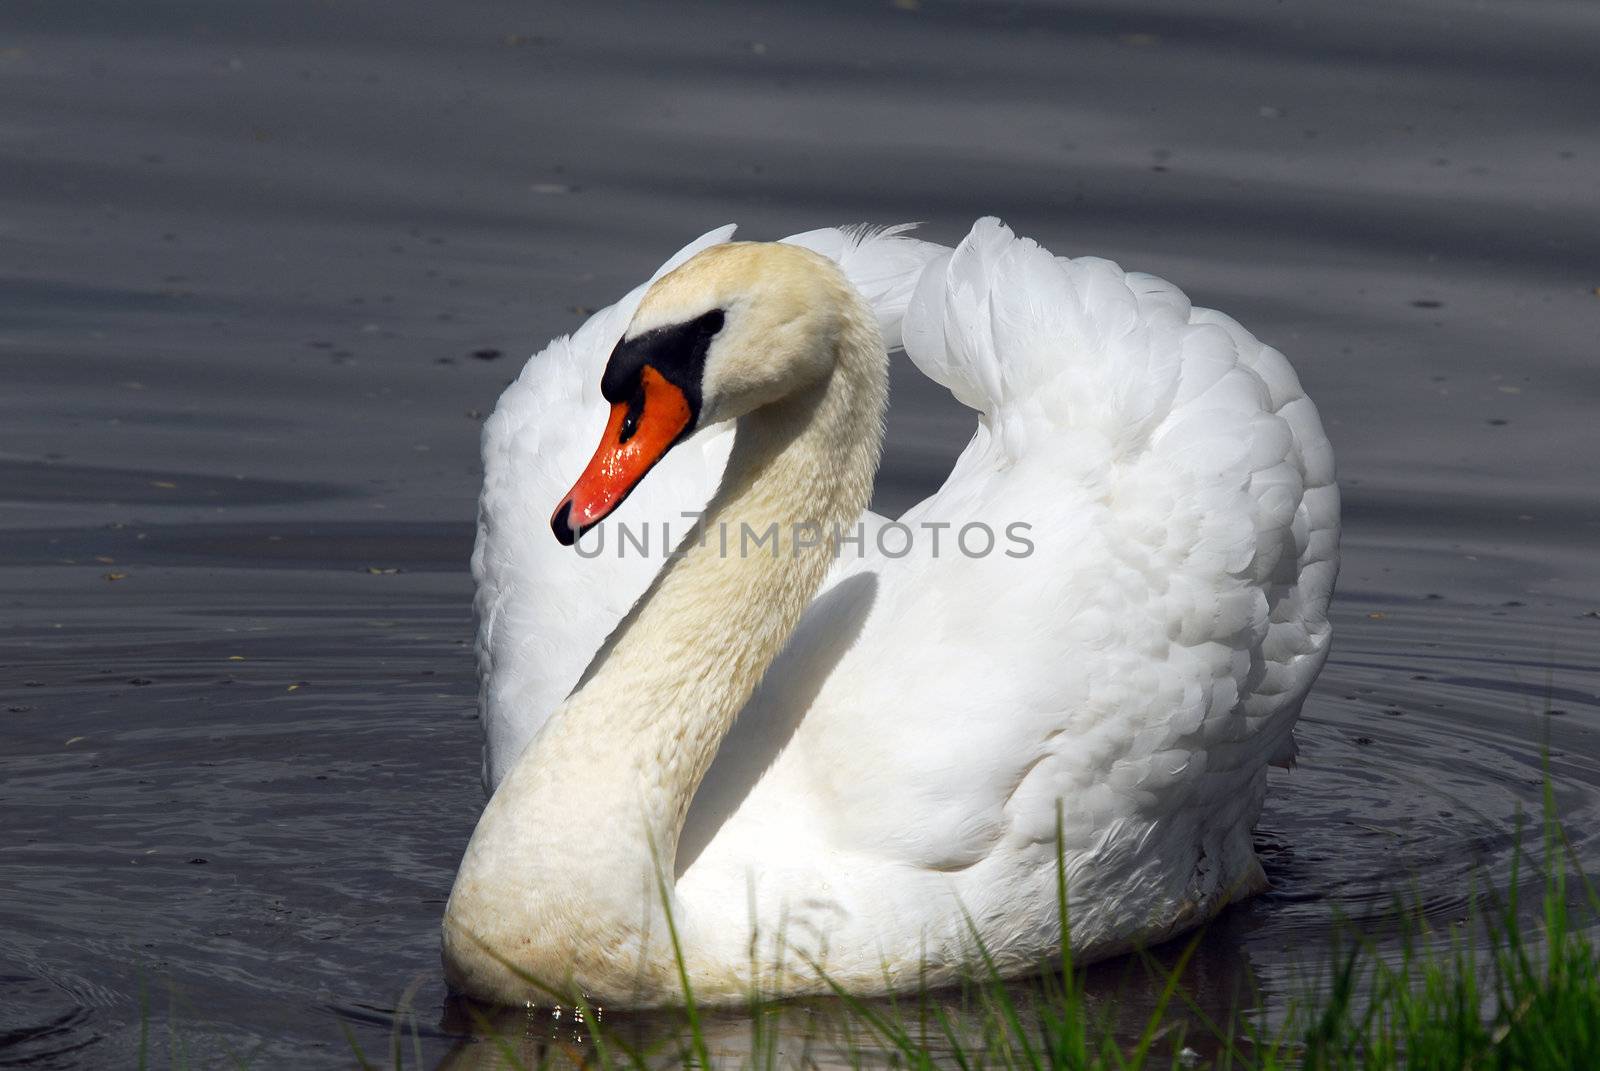 Closeup picture of a beautiful White Swan swimming